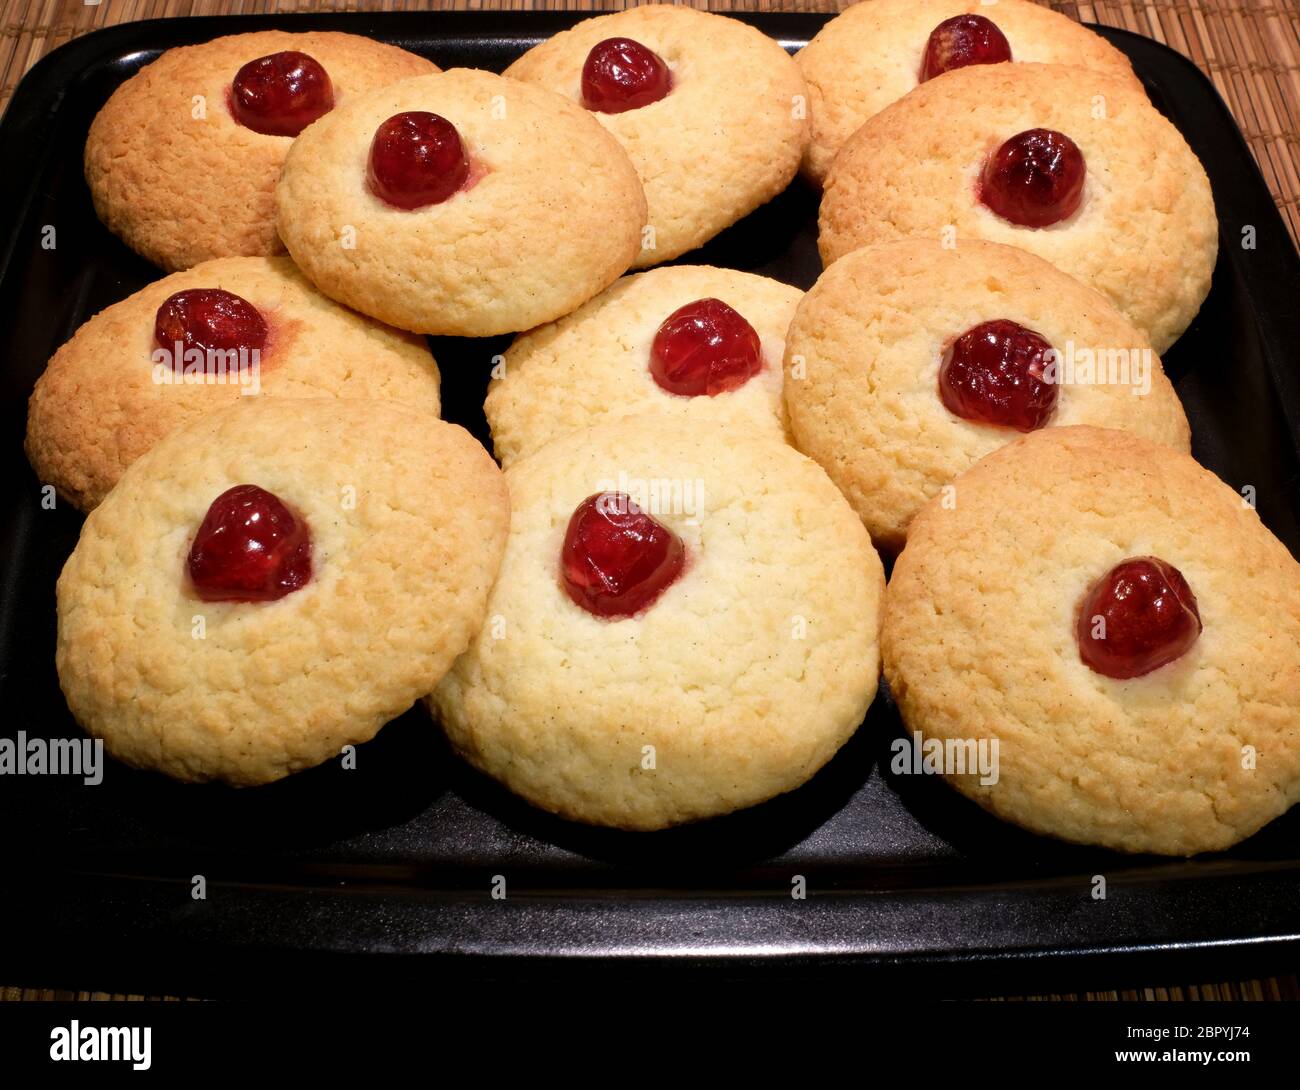 Home-baked Coconut and Cherry Cookies Stock Photo